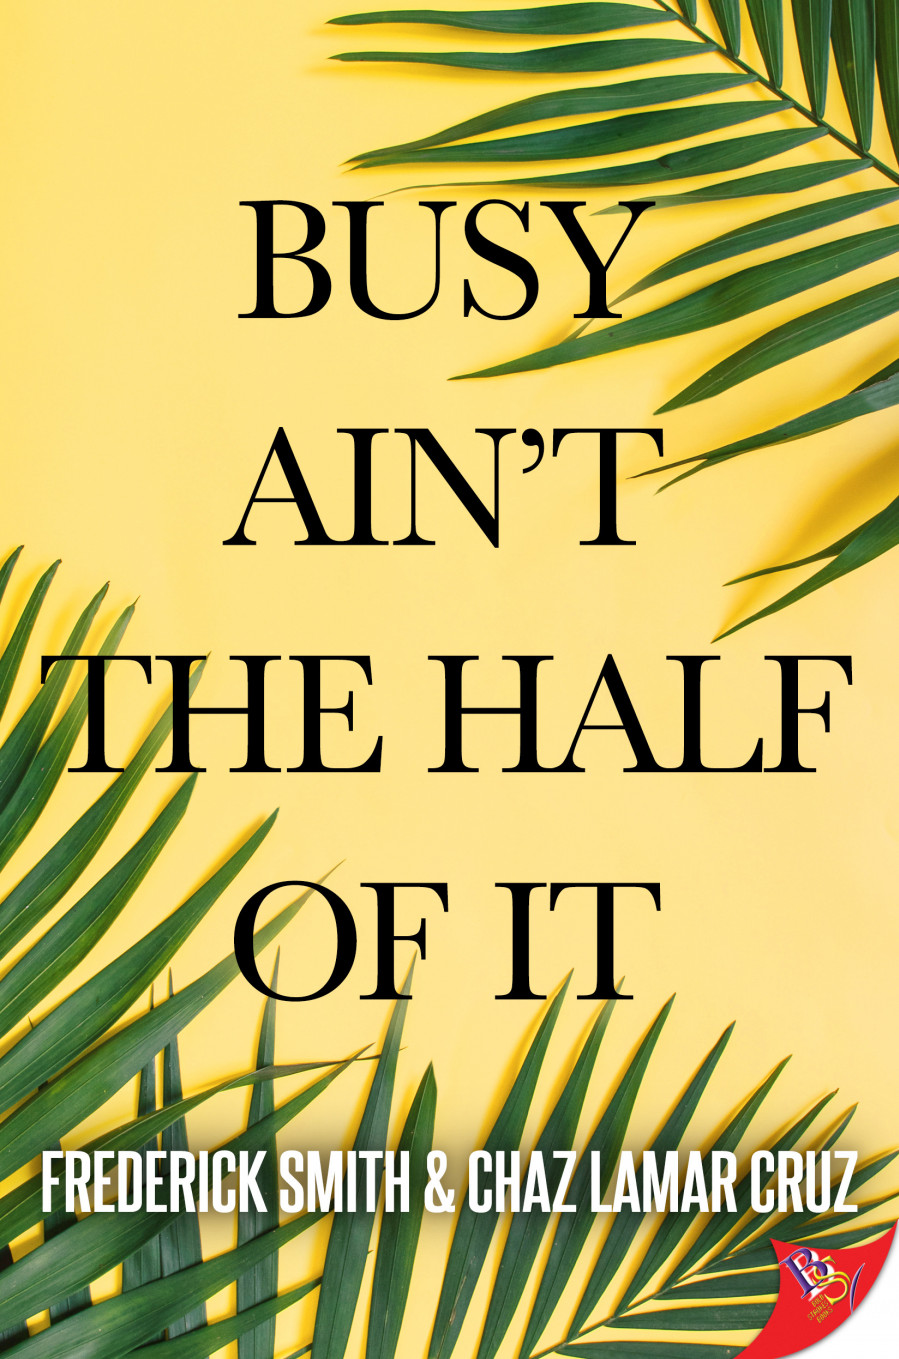 the cover of Busy Ain't the Half of It